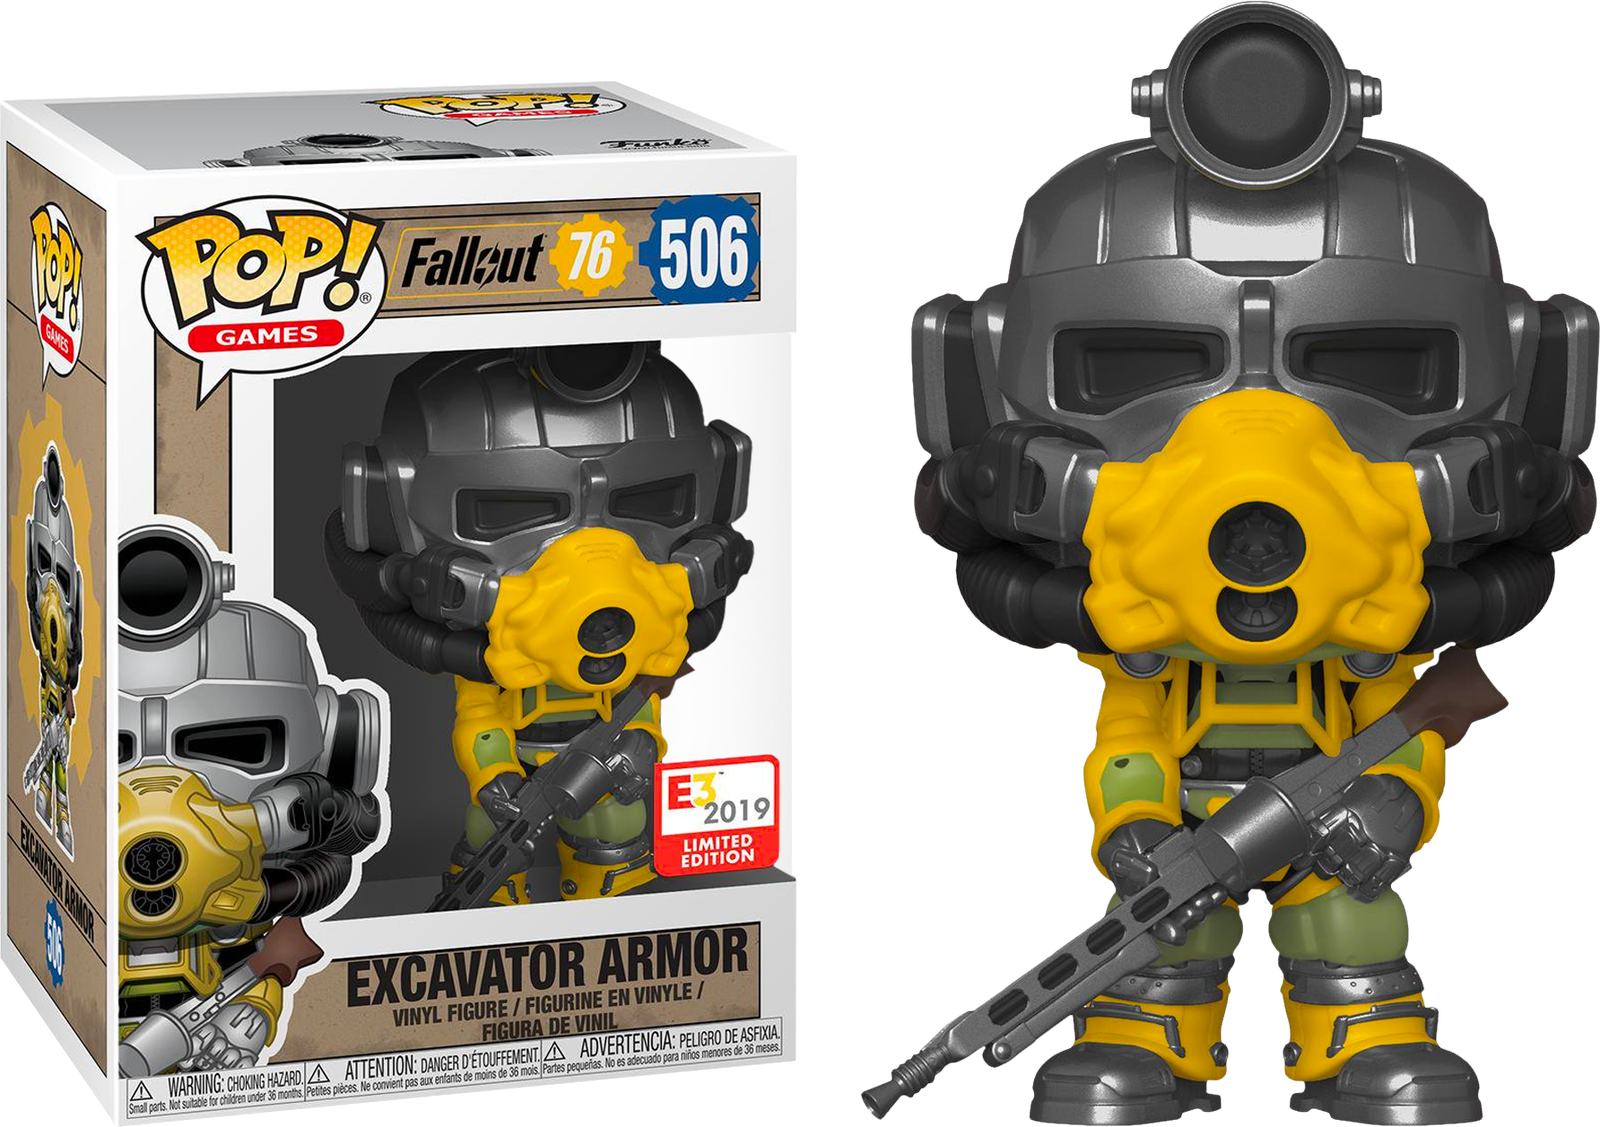 Funko Pop! Fallout 76 Excavator Armor #506 (2019 E3 Convention | The Amazing Collectables